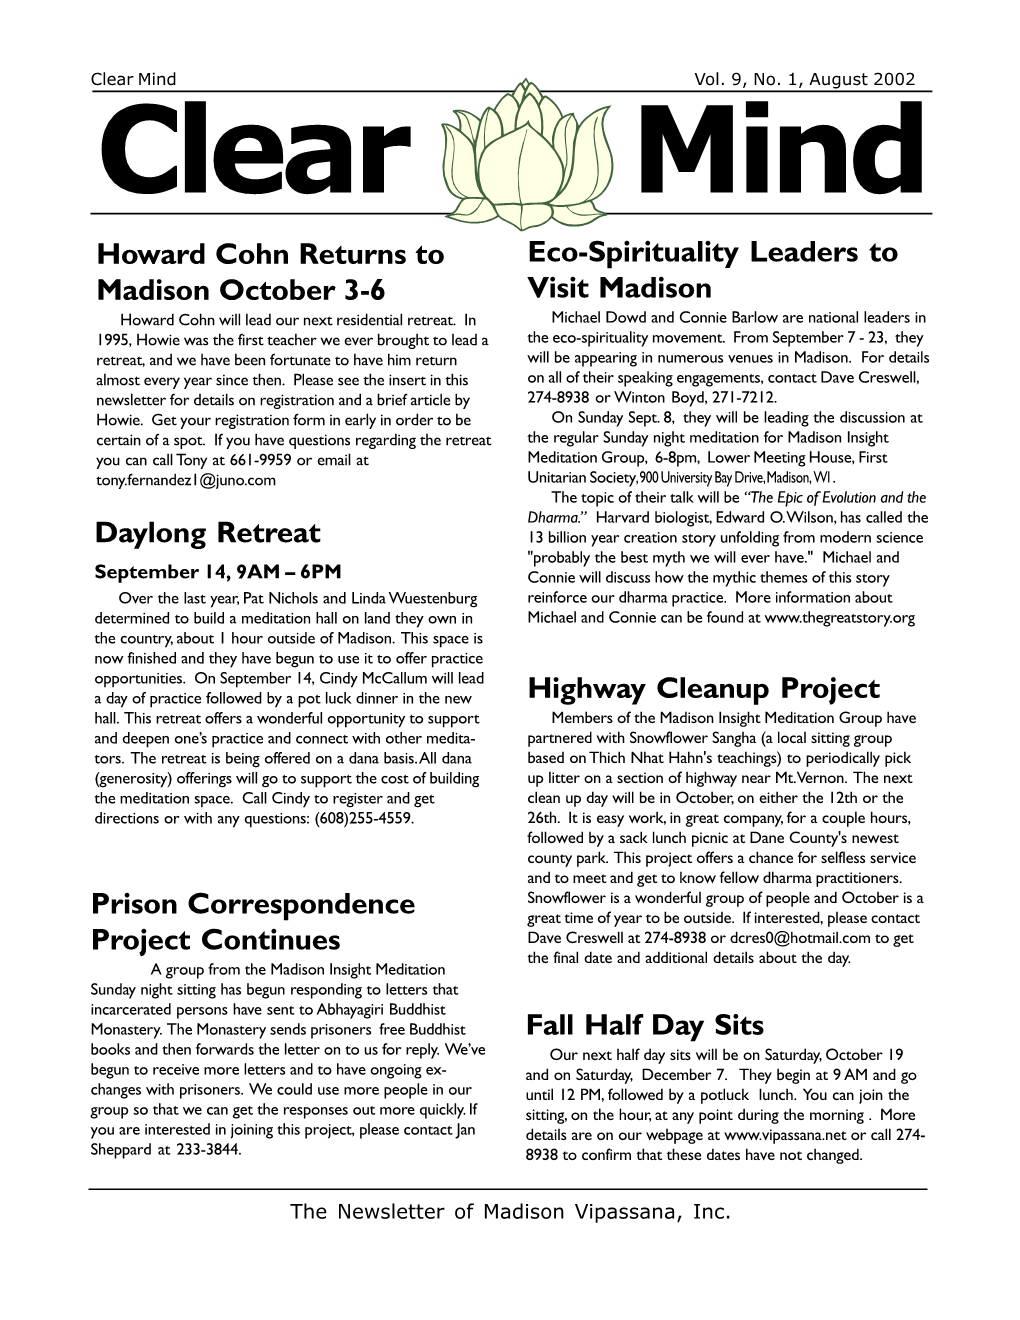 August 2002 Clear Mind Howard Cohn Returns to Eco-Spirituality Leaders to Madison October 3-6 Visit Madison Howard Cohn Will Lead Our Next Residential Retreat